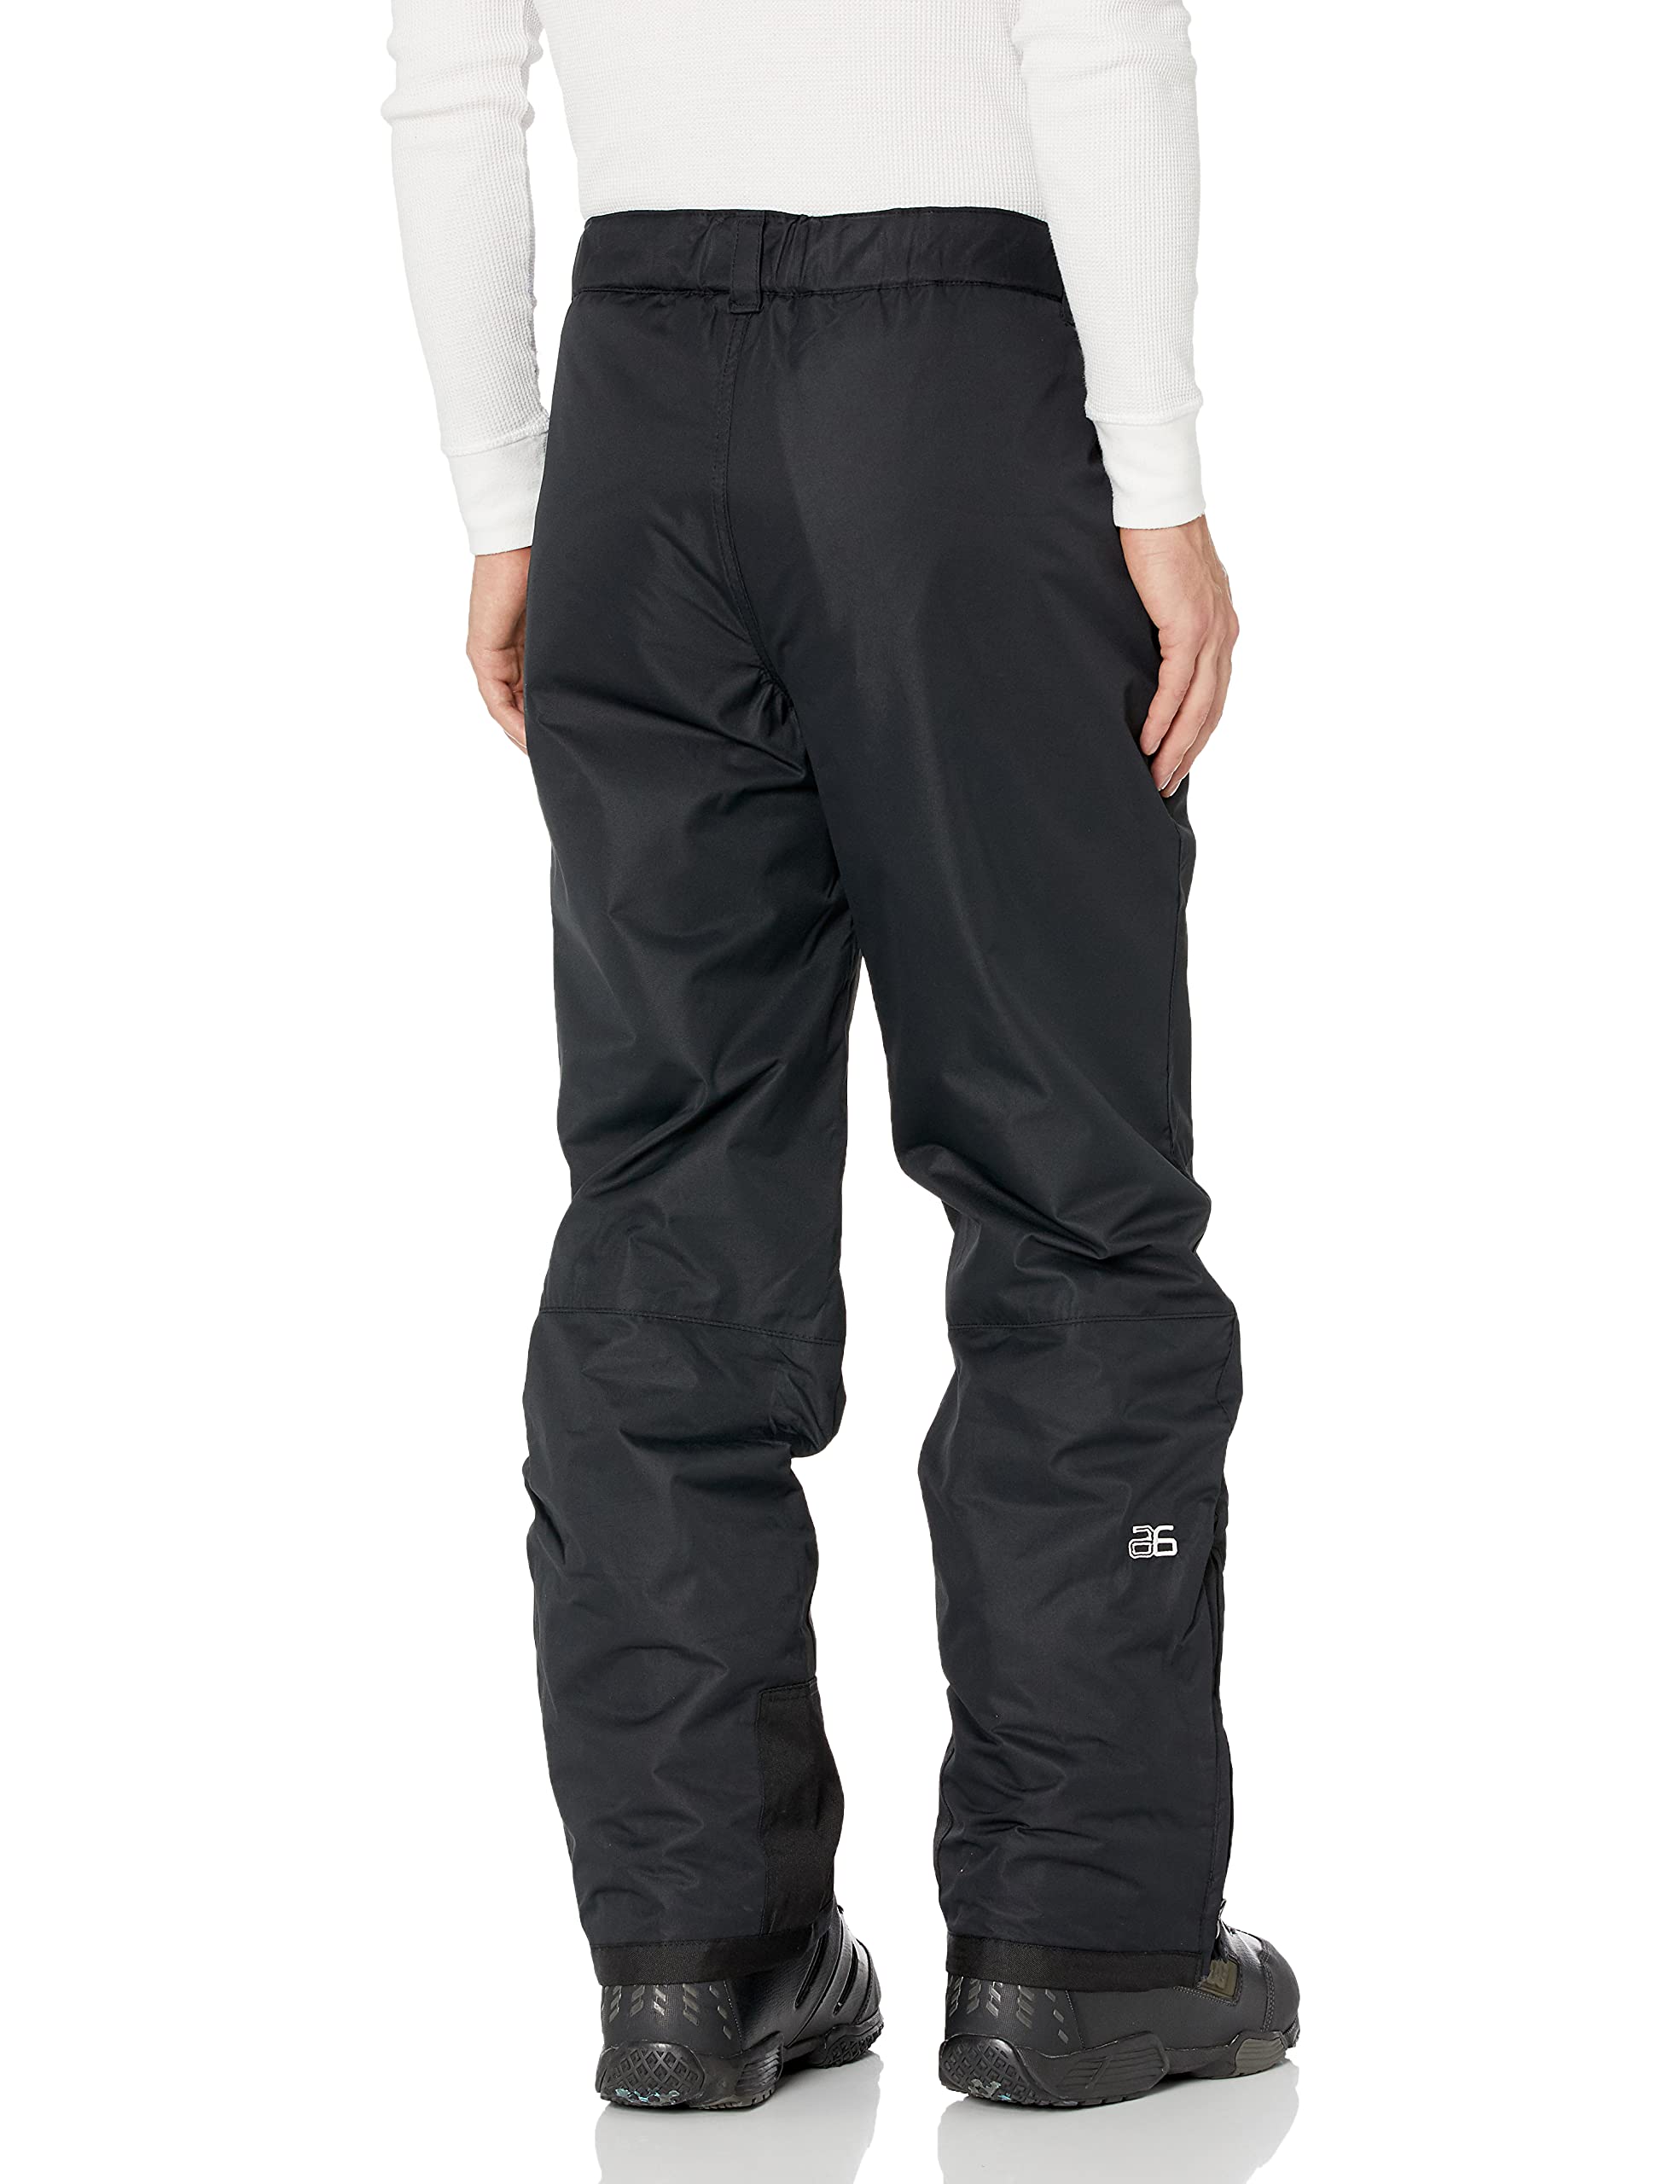 The Best-selling Arctix Snow Pants Are a Must-have